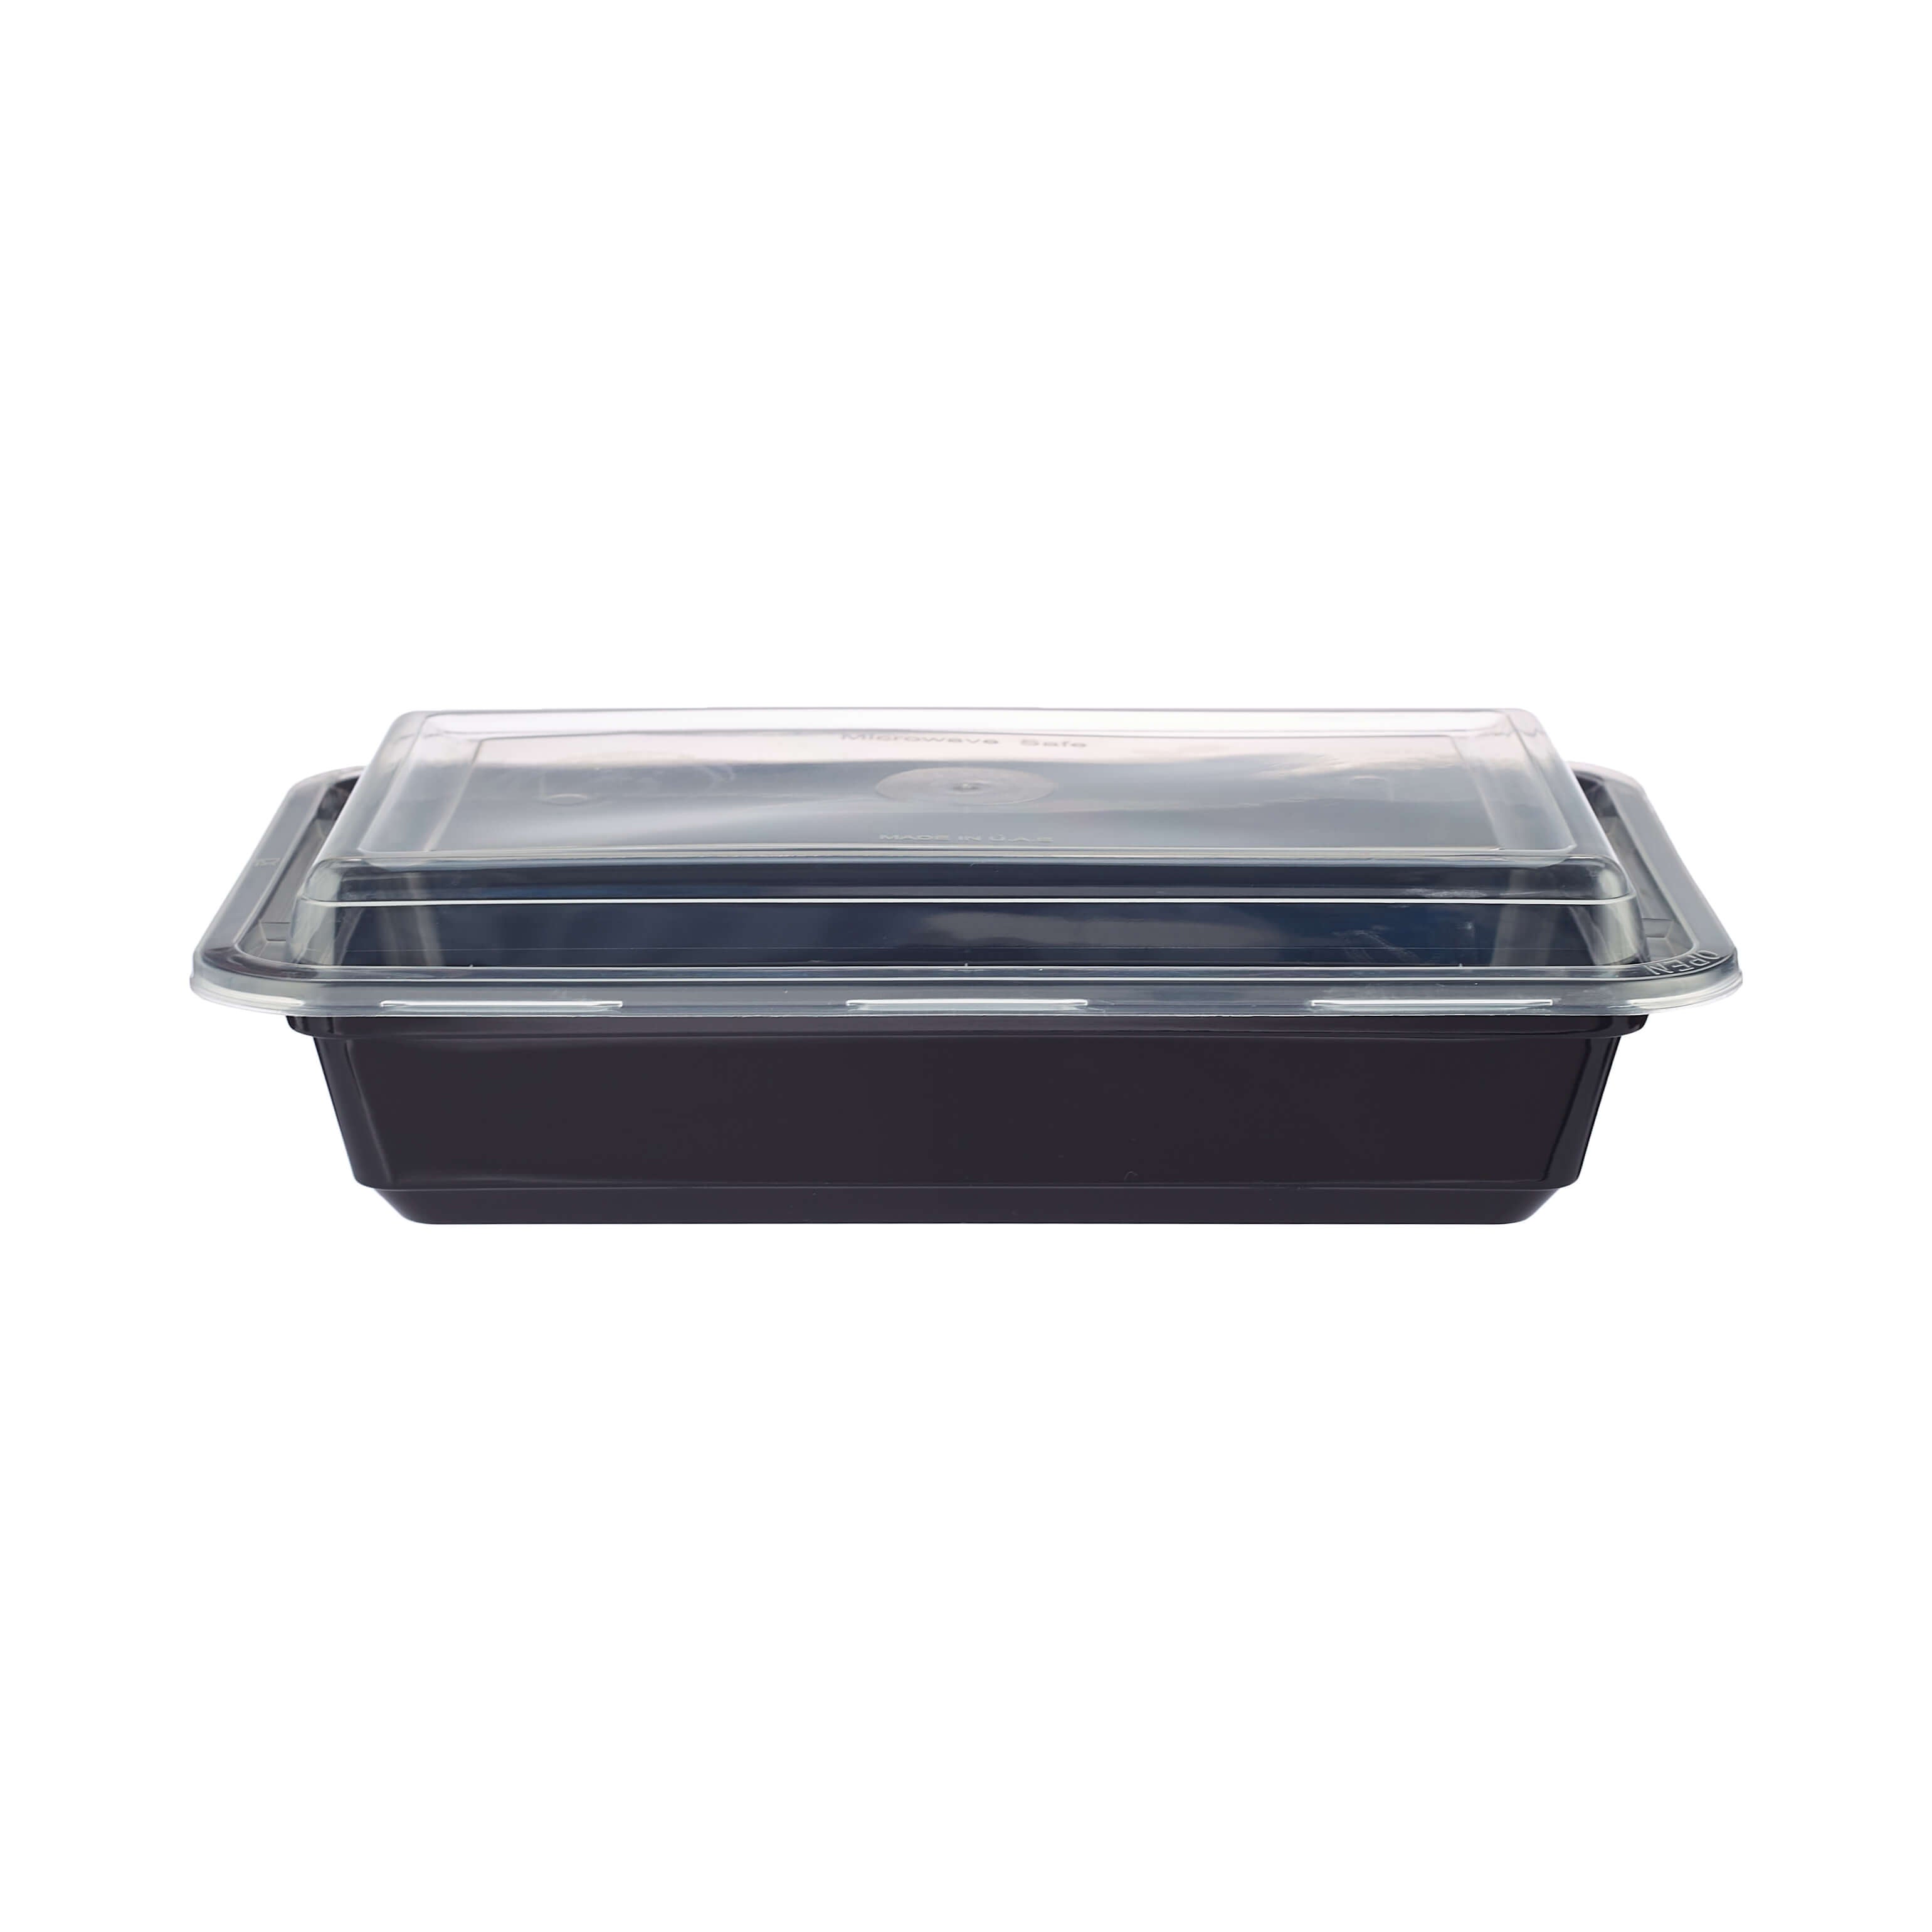 8 Oz Black Base Rectangular Container with lid